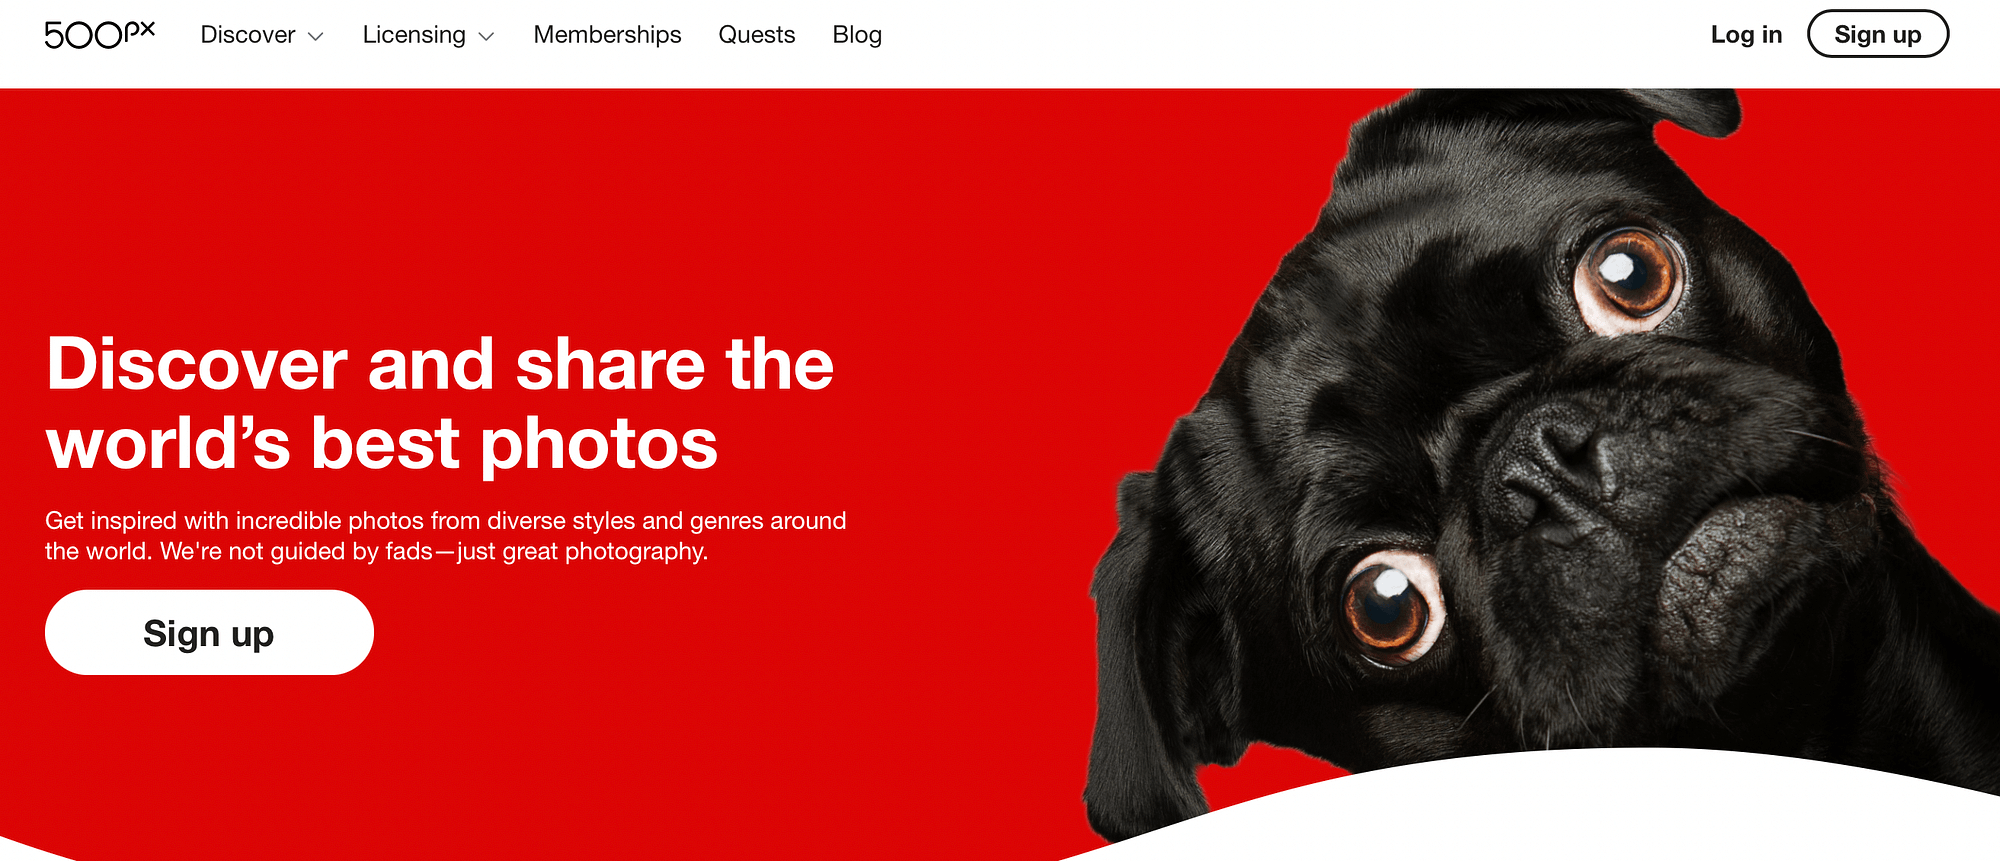 500px homepage.